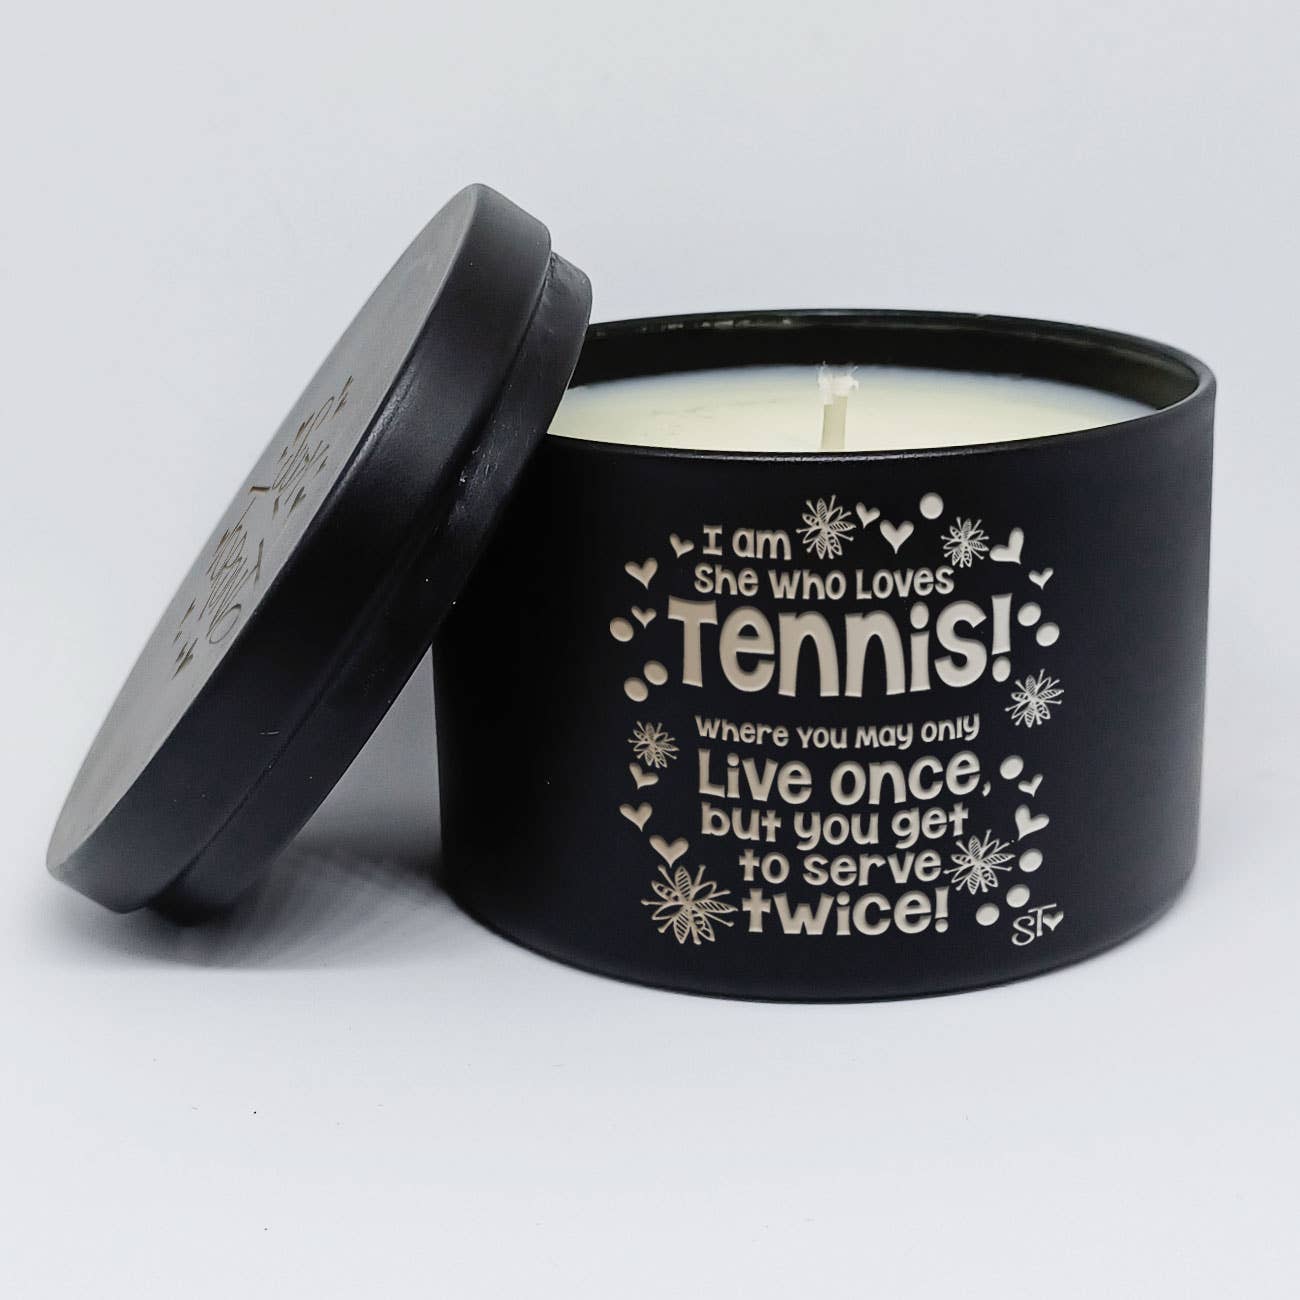 She Who Loves Tennis: Grapefruit Candle